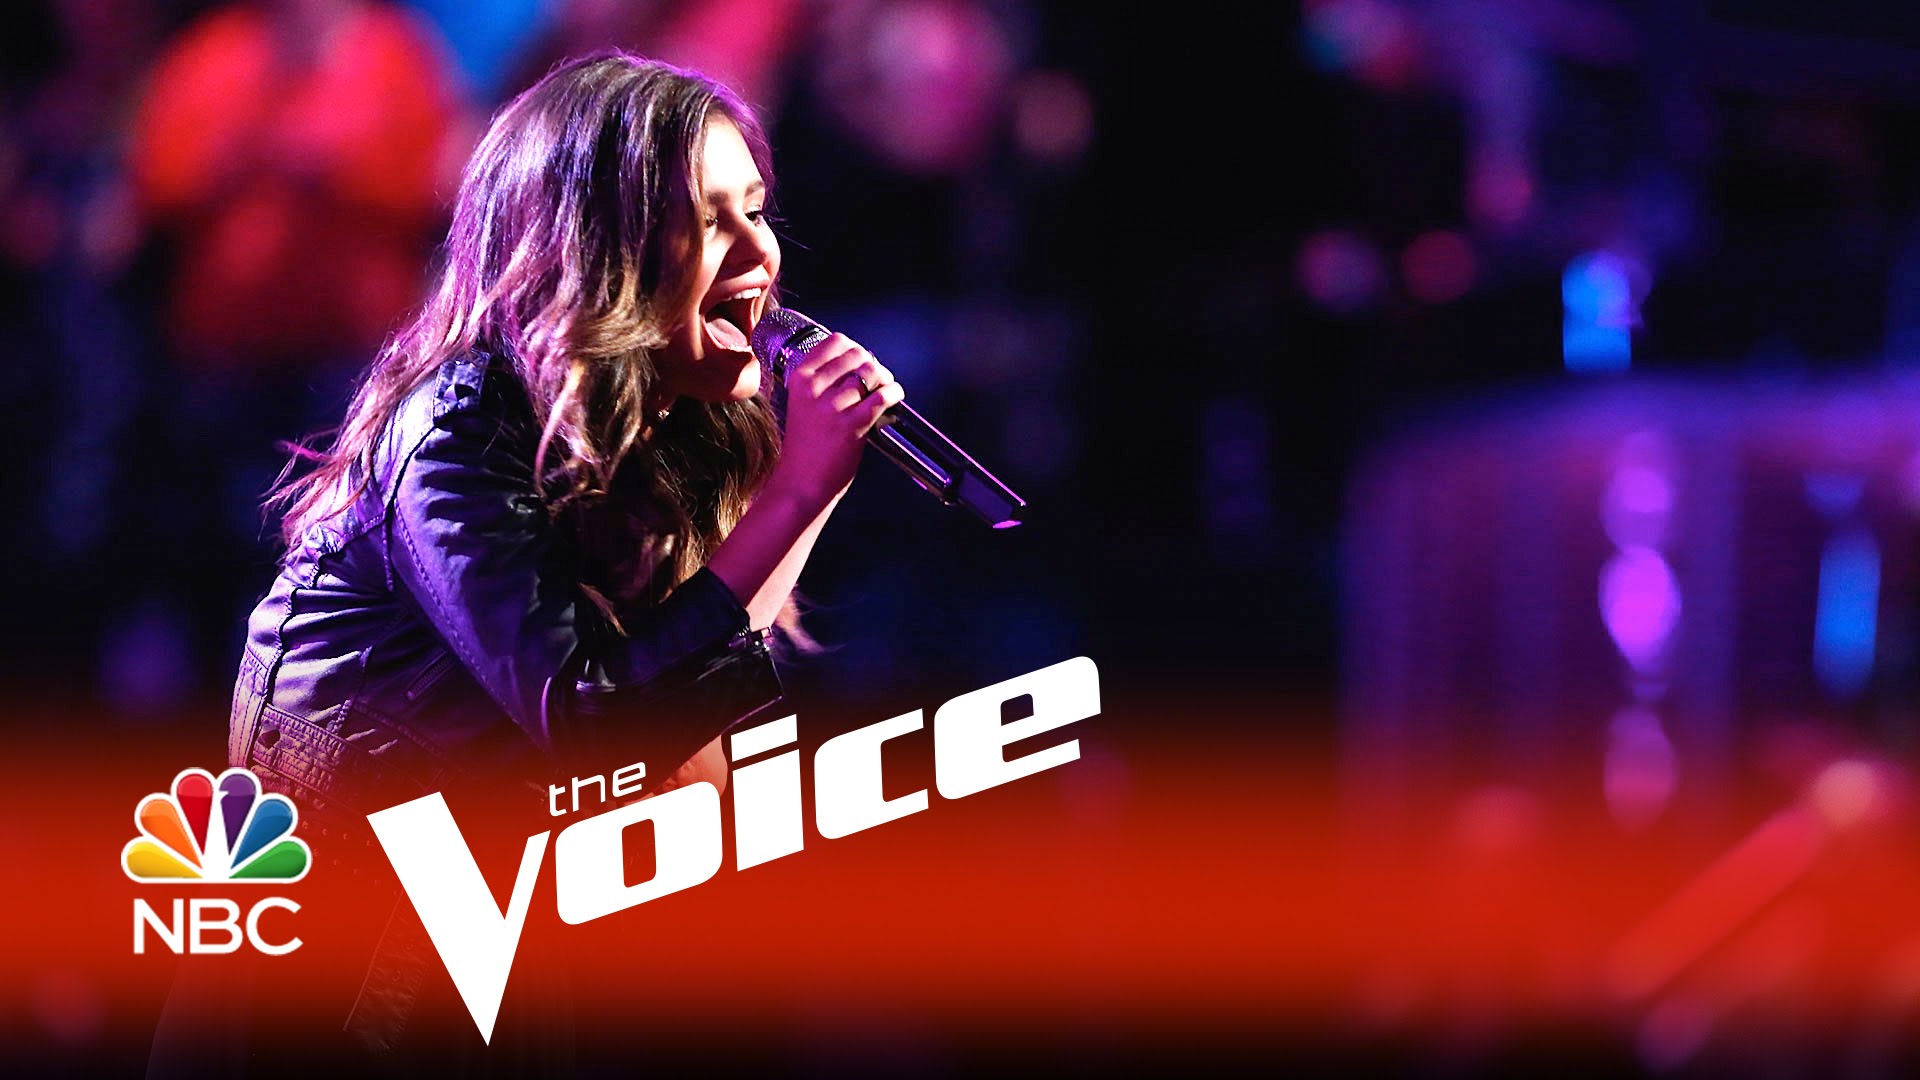 Jacquie Lee Performs on The Voice